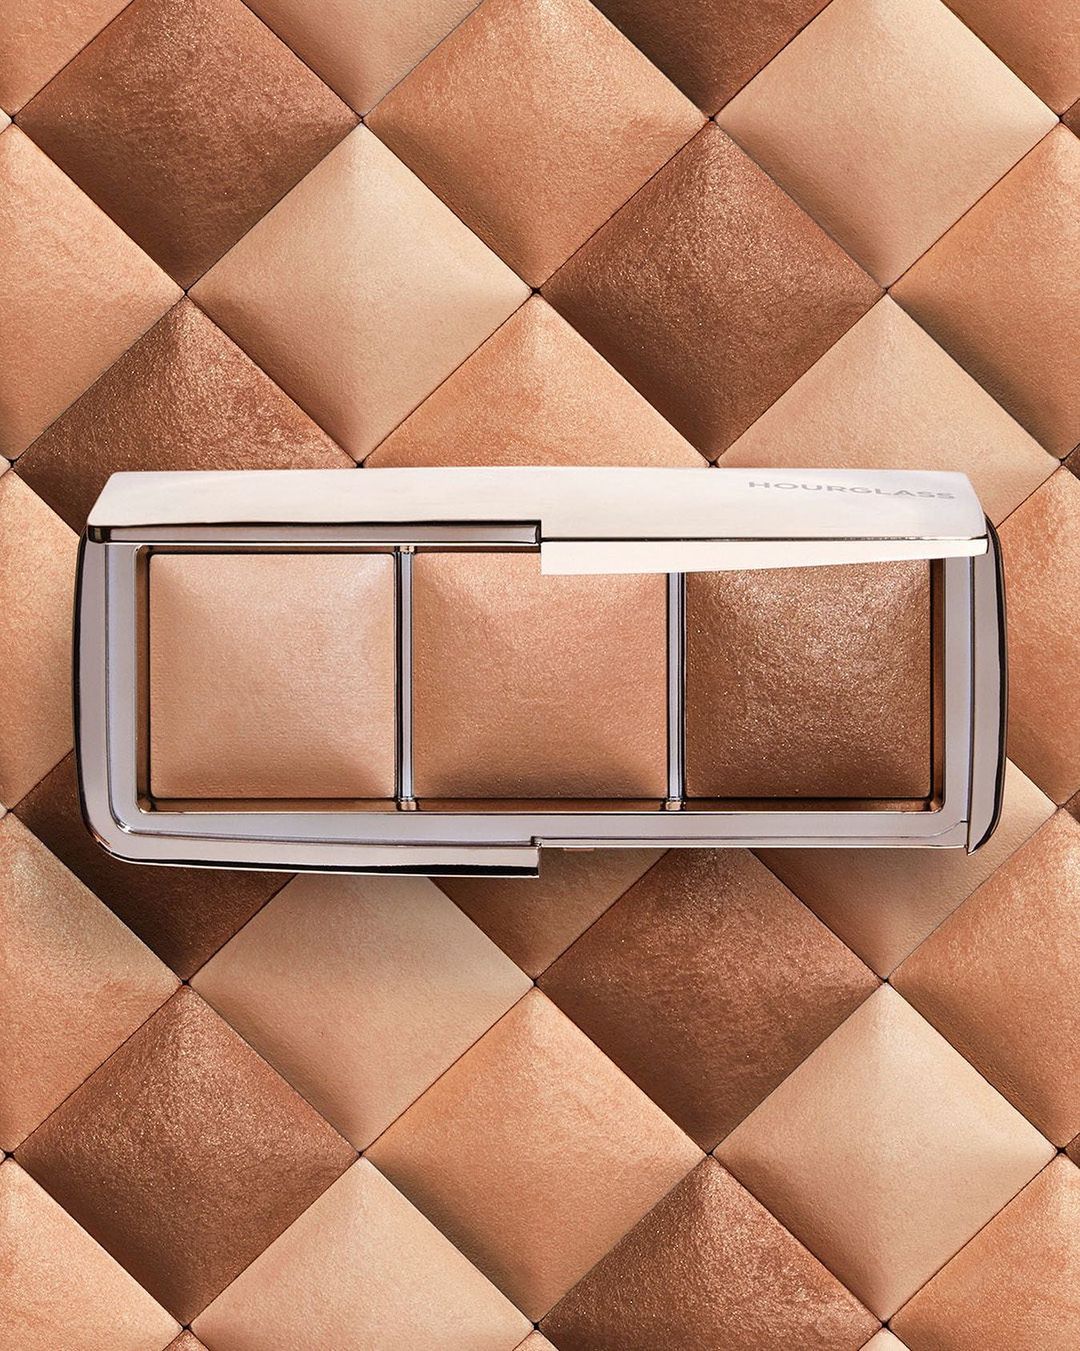 HOURGLASS Ambient Lighting Palette 2 Contour Highlight Powder